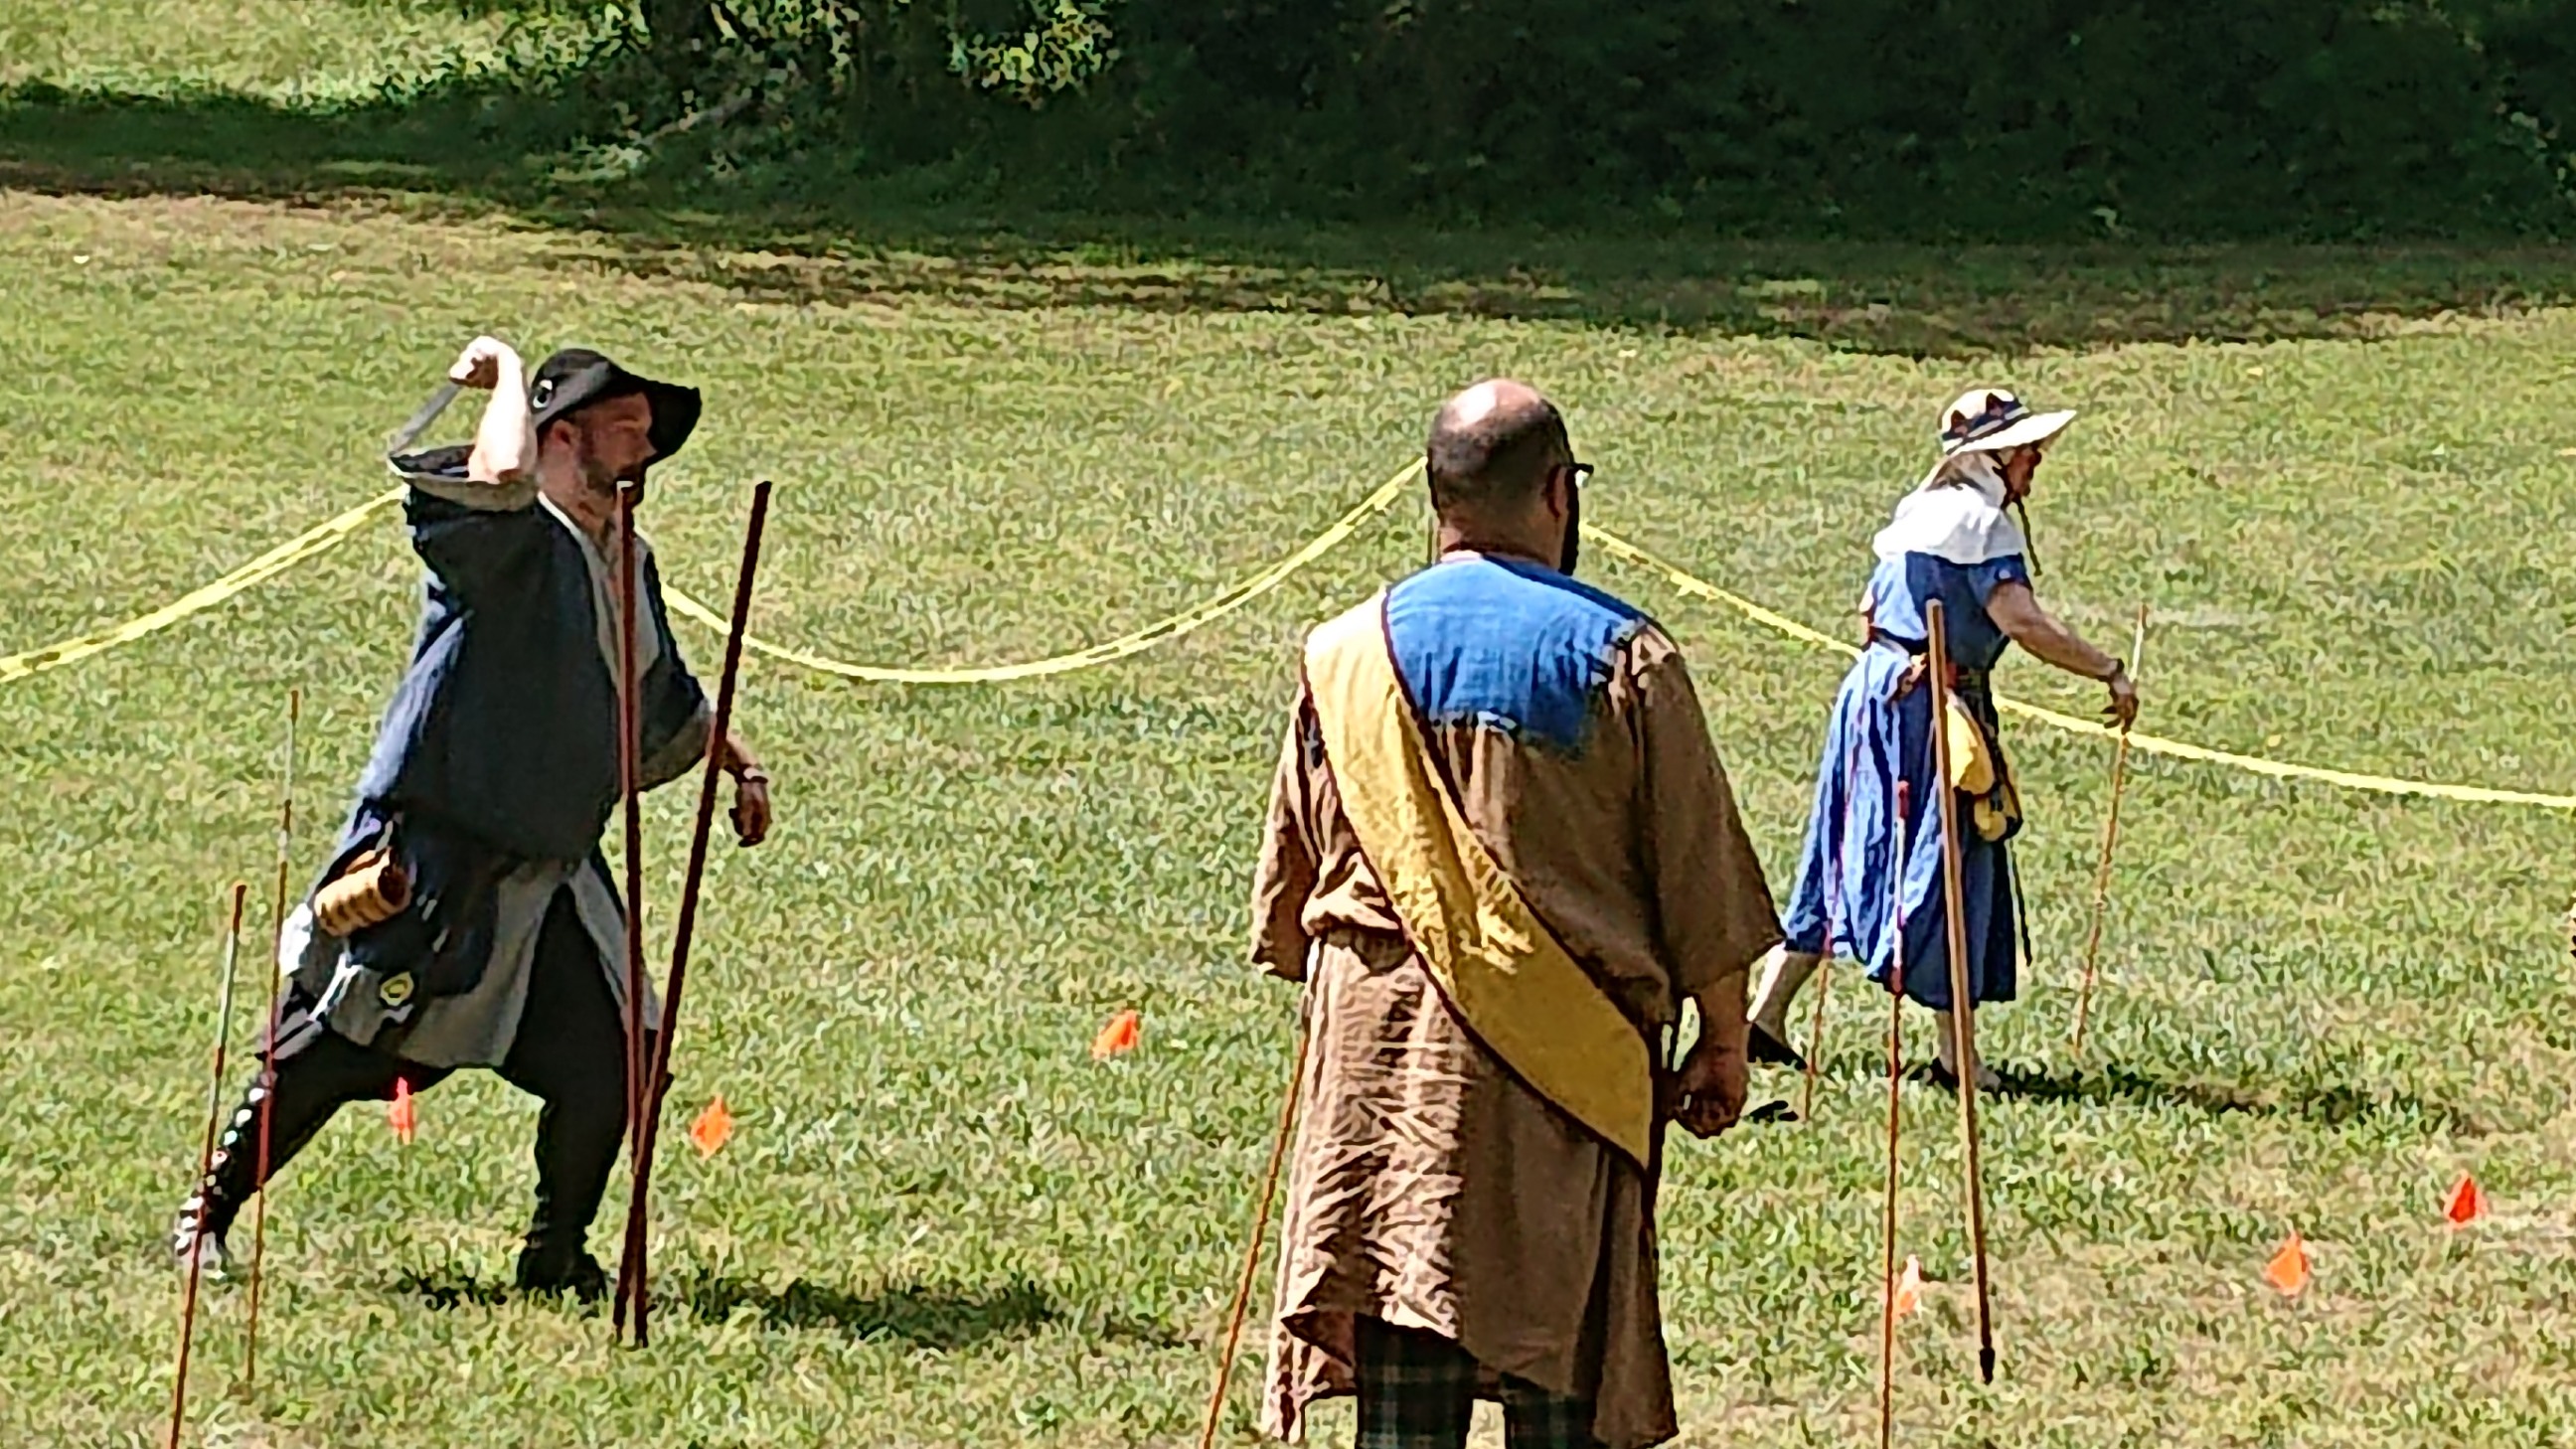 Competition at Kings and Queens Thrown Weapons Champions